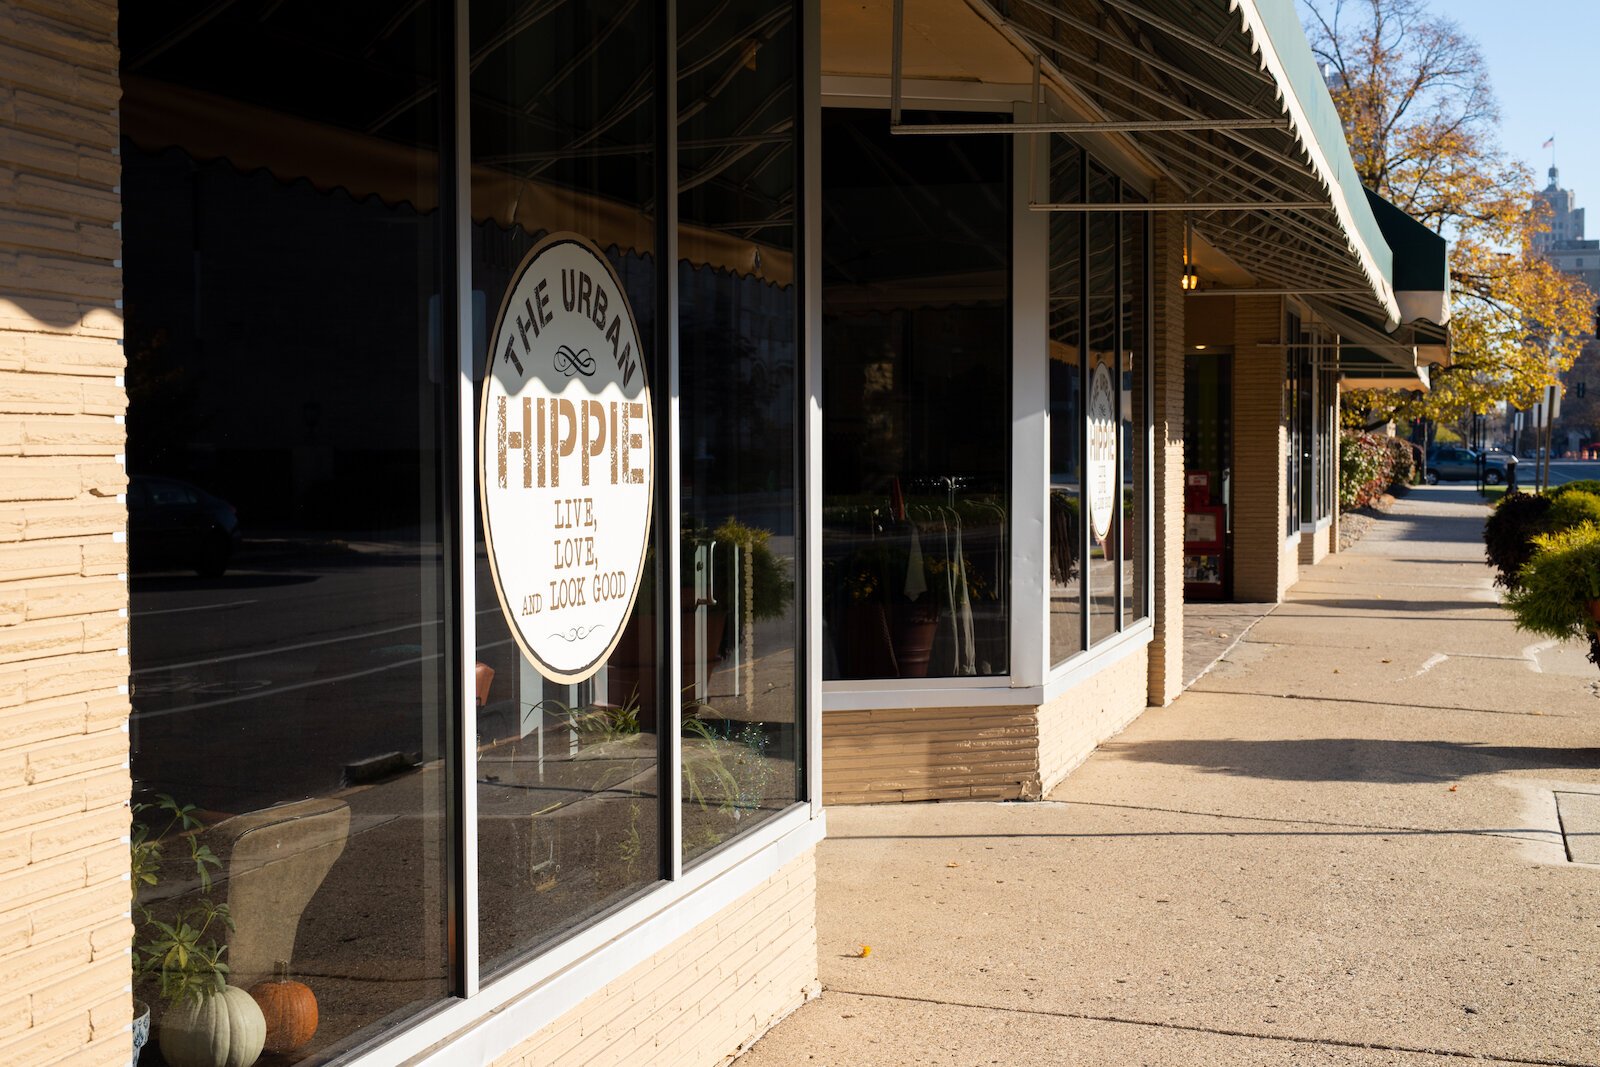 The Urban Hippie and David Talbott Collection are located next door to each other on Berry Street.